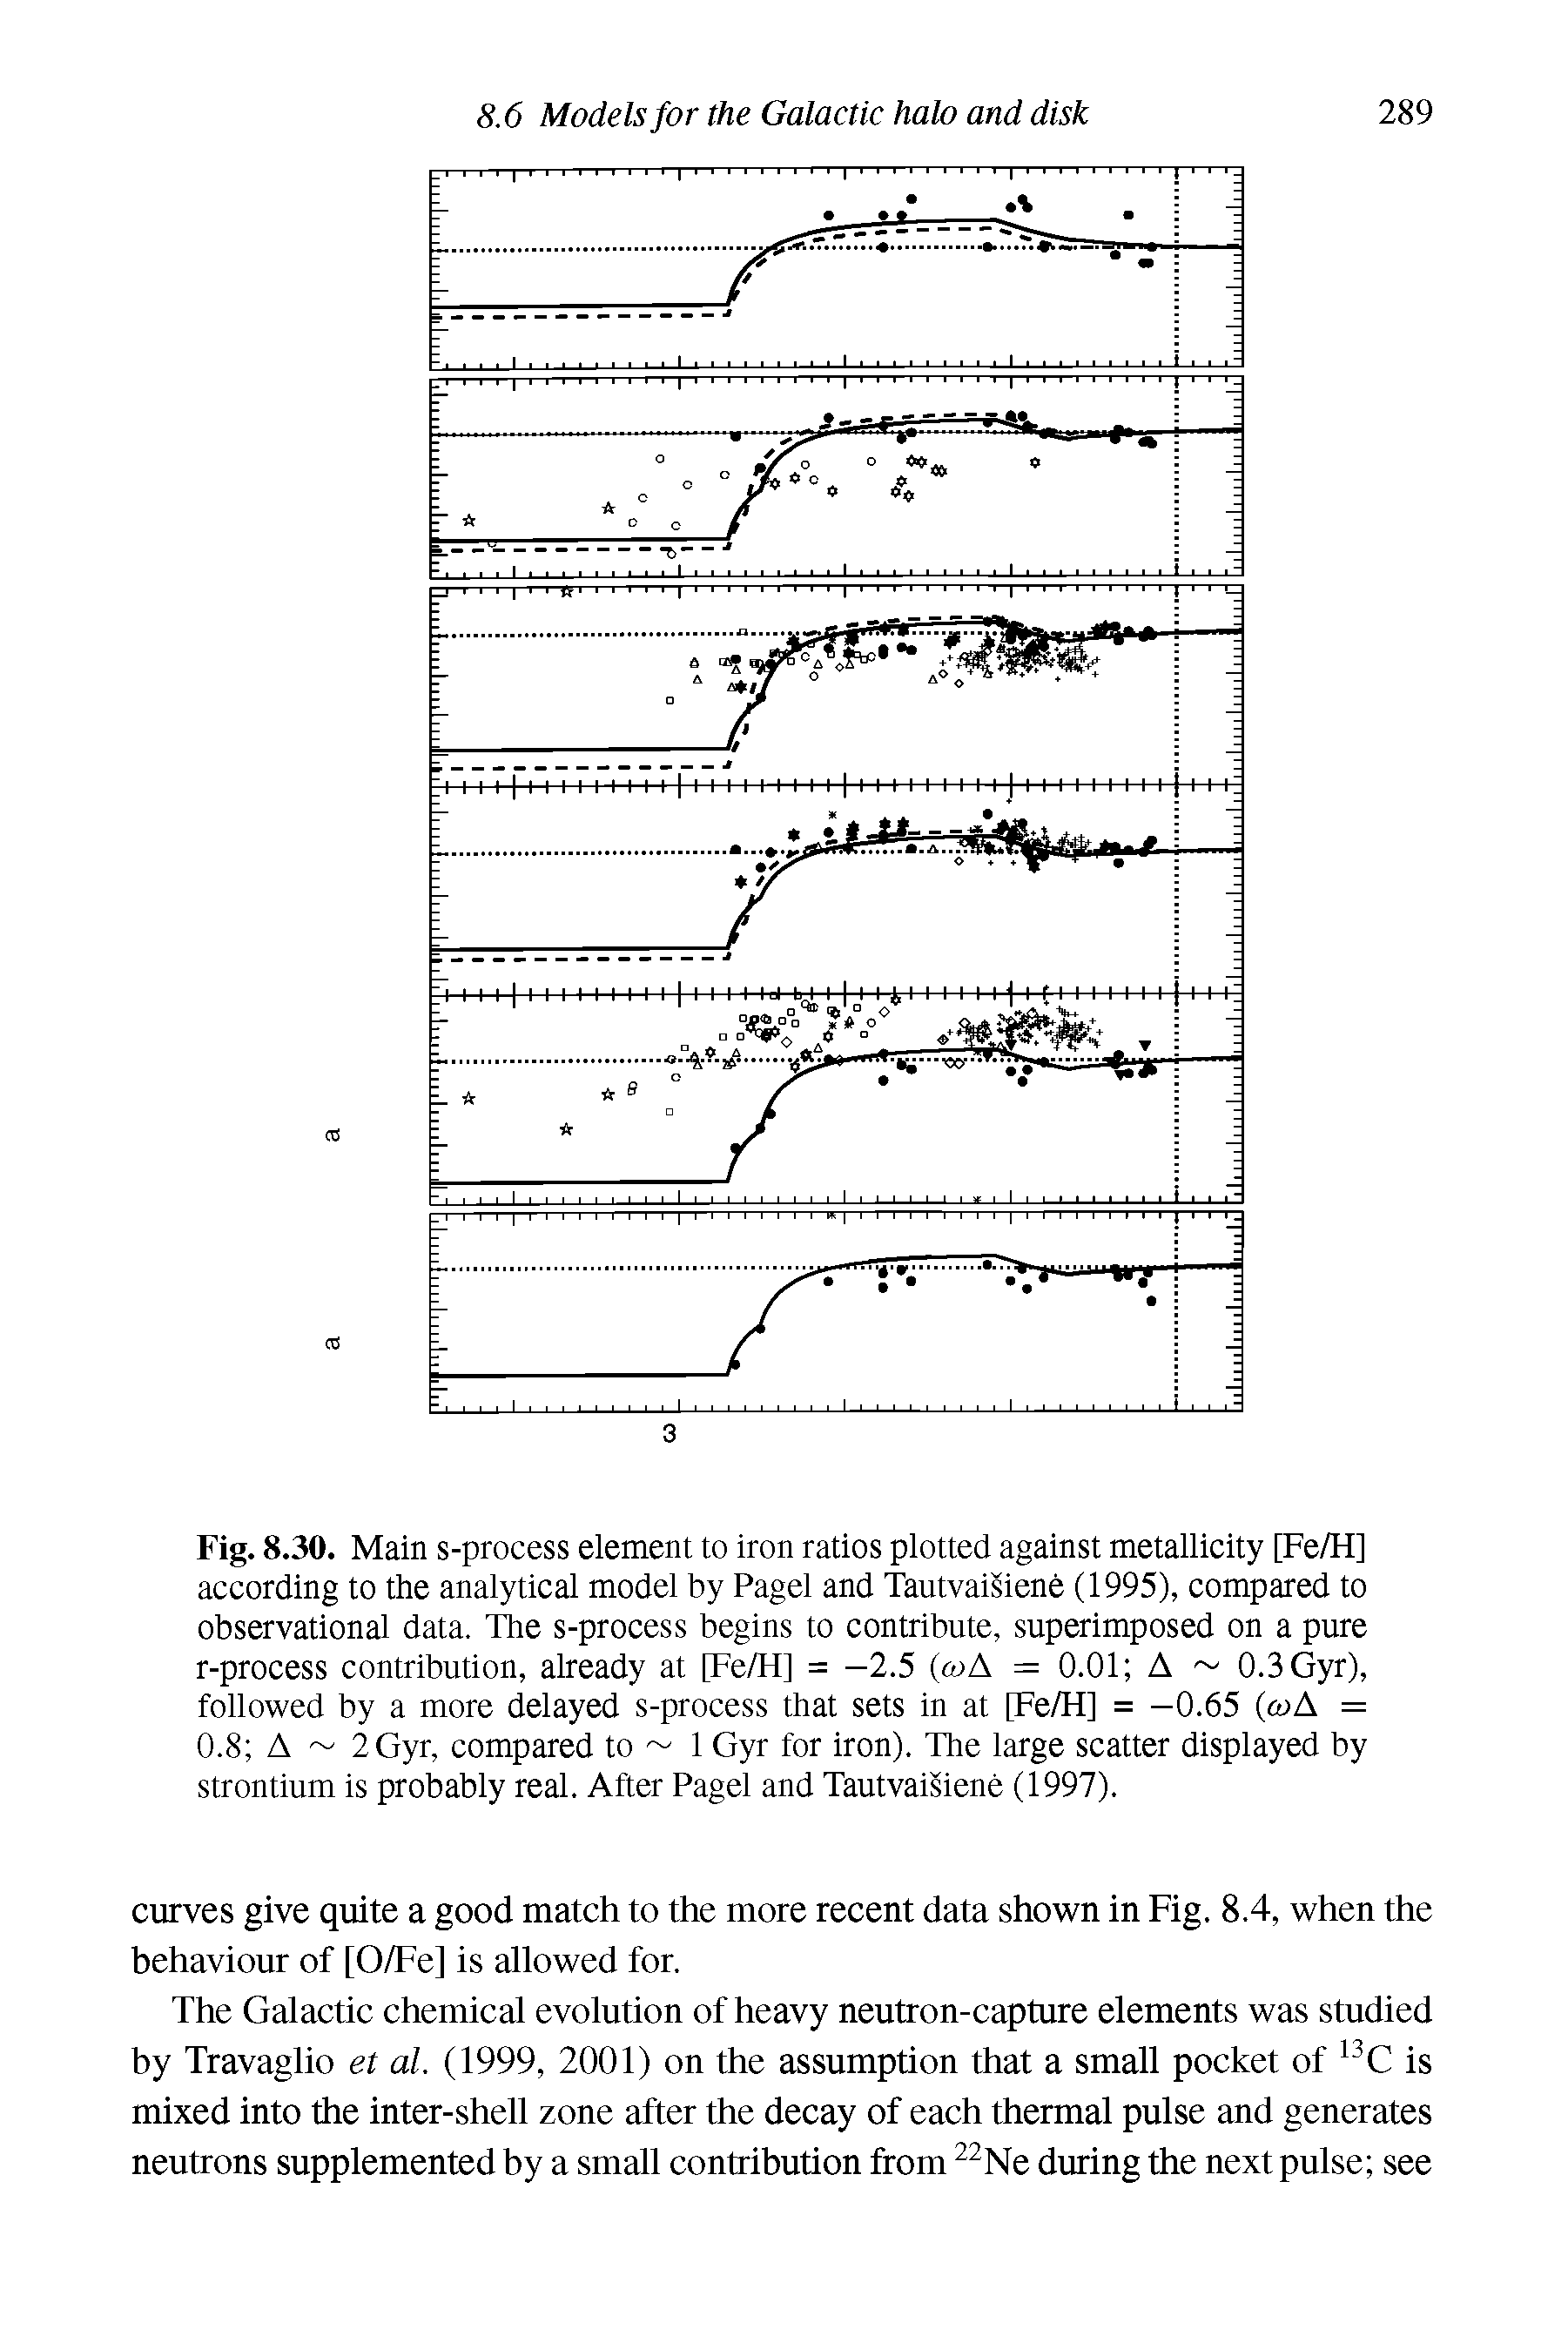 Fig. 8.30. Main s-process element to iron ratios plotted against metallicity [Fe/H] according to the analytical model by Pagel and Tautvaisiene (1995), compared to observational data. The s-process begins to contribute, superimposed on a pure r-process contribution, already at [Fe/H] = —2.5 ( >A = 0.01 A 0.3 Gyr), followed by a more delayed s-process that sets in at [Fe/H] = -0.65 ( >A = 0.8 A 2 Gyr, compared to 1 Gyr for iron). The large scatter displayed by strontium is probably real. After Pagel and Tautvaisiene (1997).